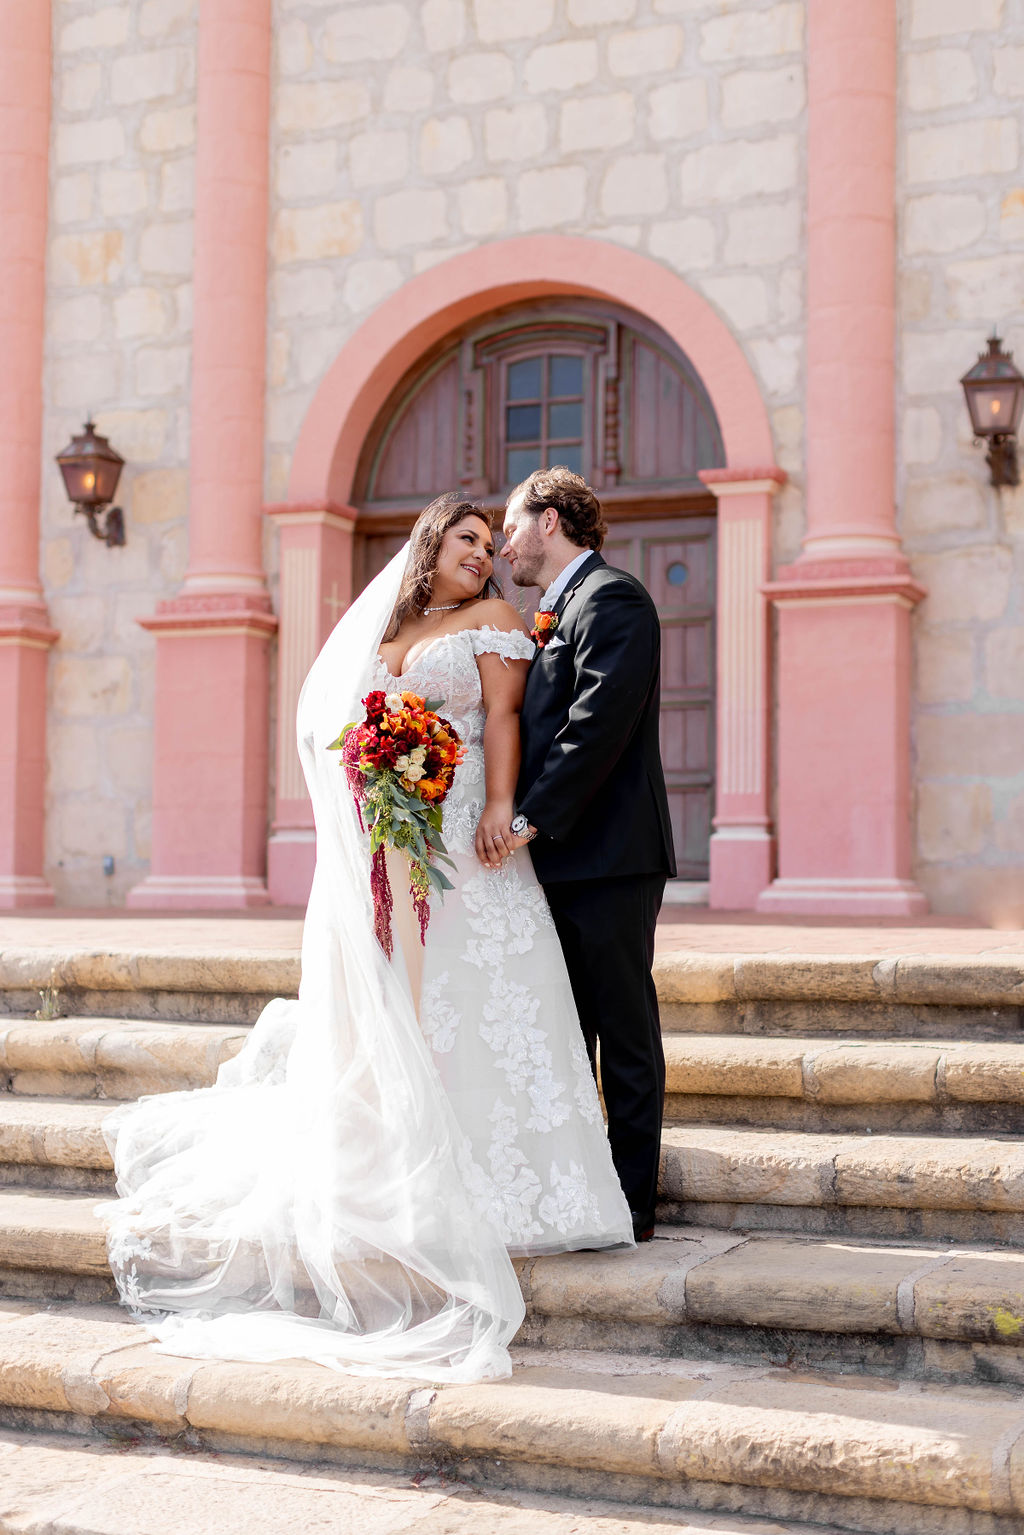 Bride and groom standing on the front steps of the Spanish Colonial style mission with pink pillars at Mission Santa Barbara wedding | Photo by Sarah Block Photography